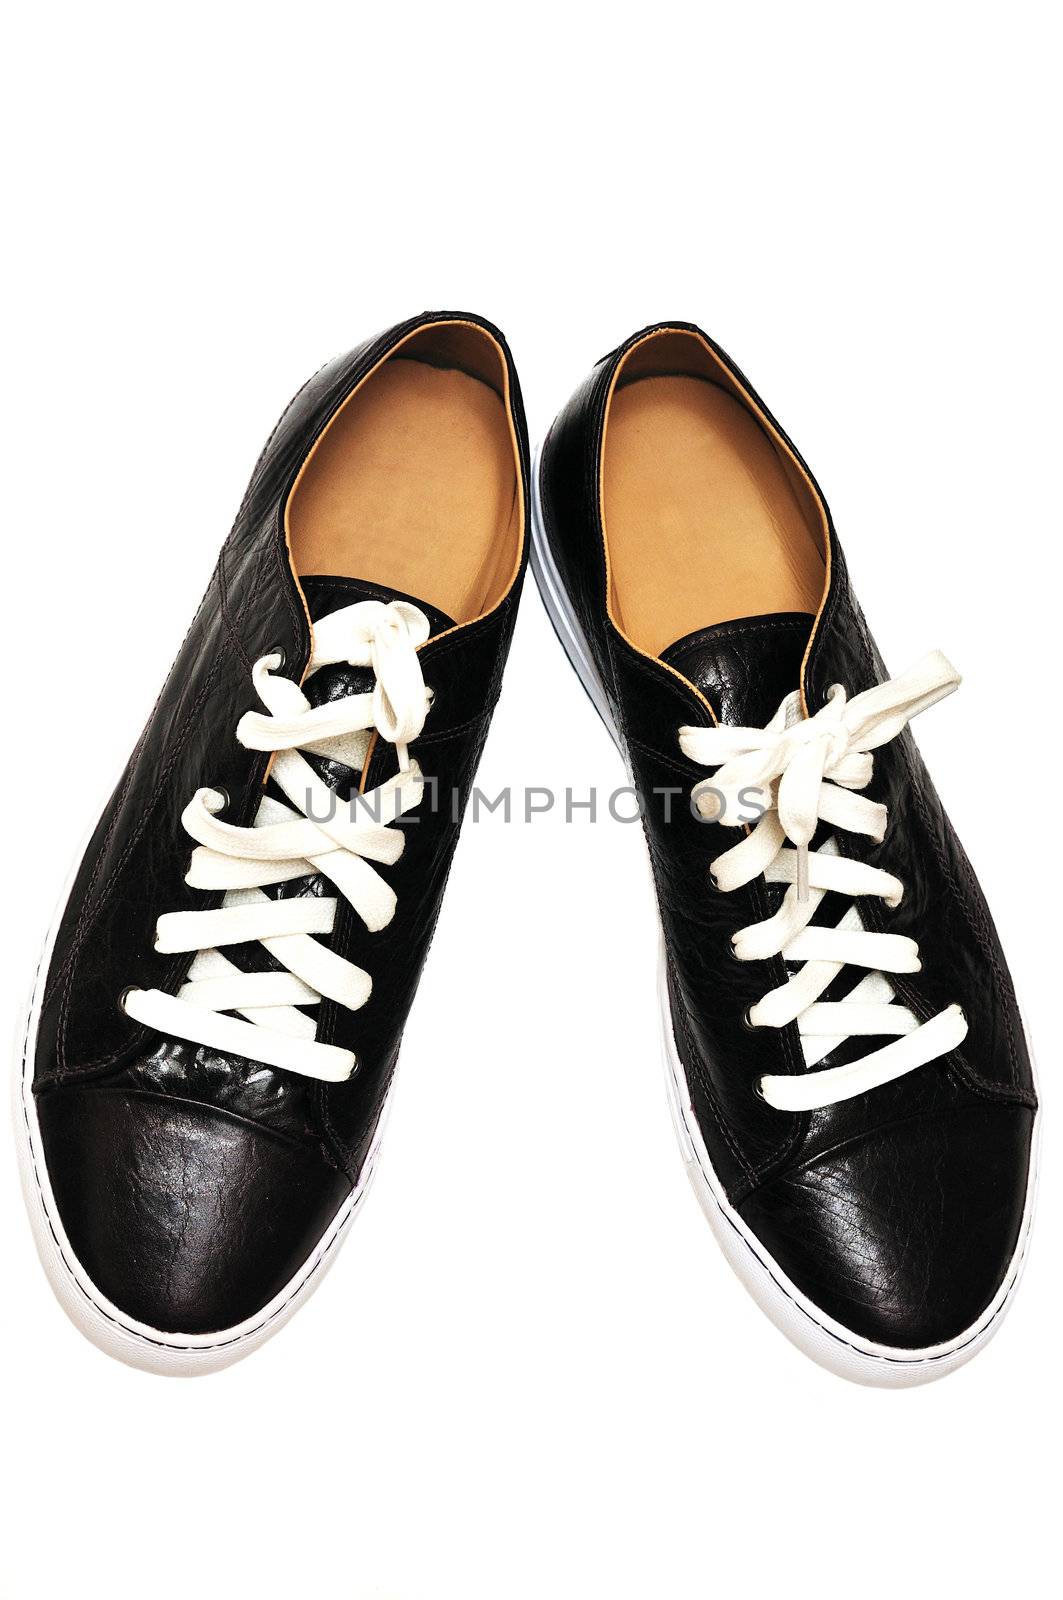 Sport leather man's shoes isolated on the white
